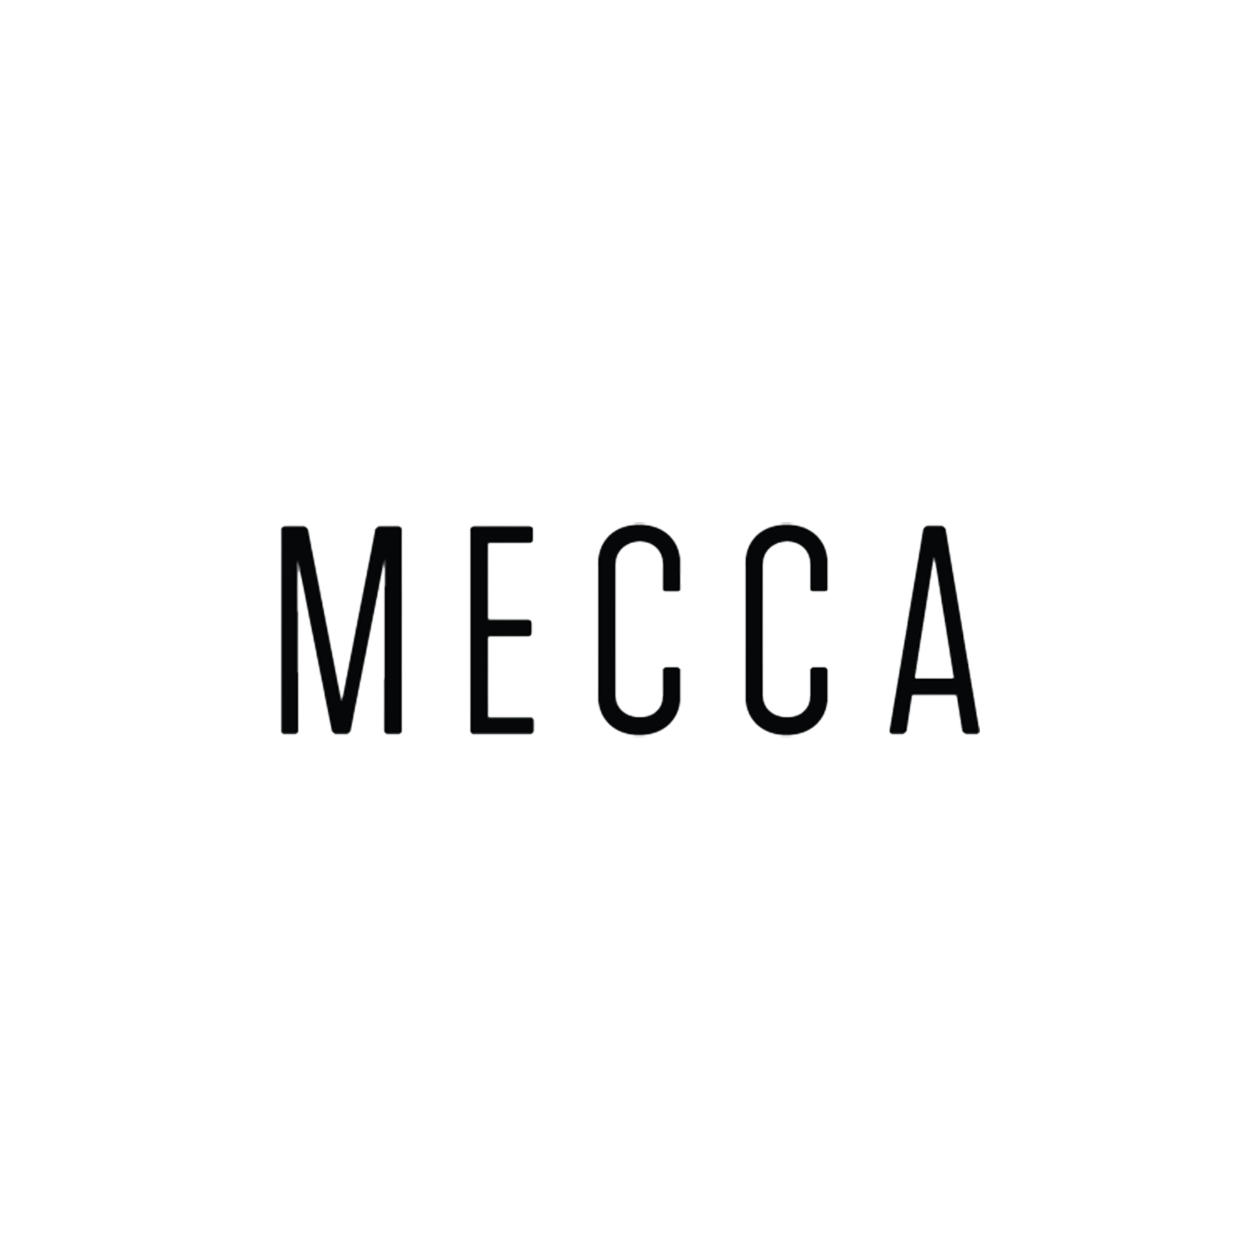 Mecca specialty coffee roasters